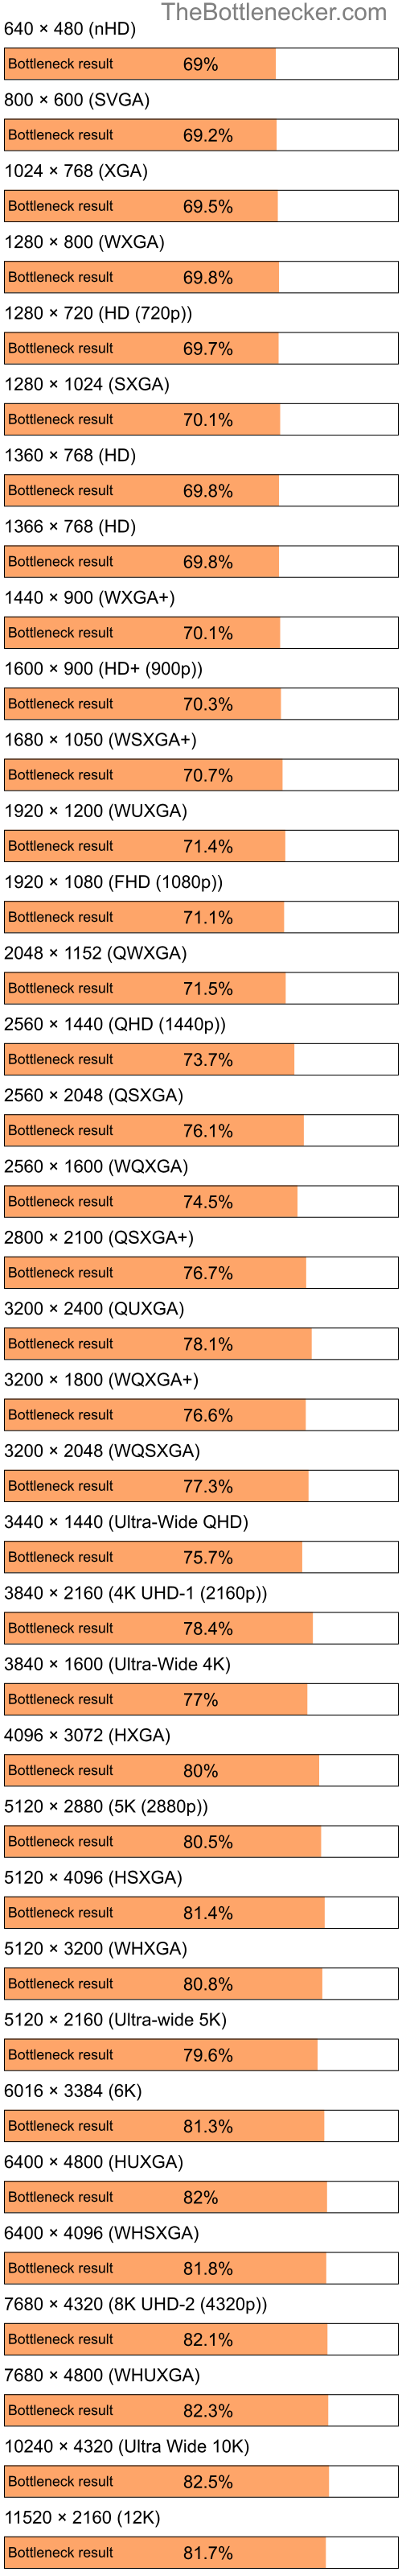 Bottleneck results by resolution for Intel Atom Z520 and AMD Radeon X1300 in General Tasks